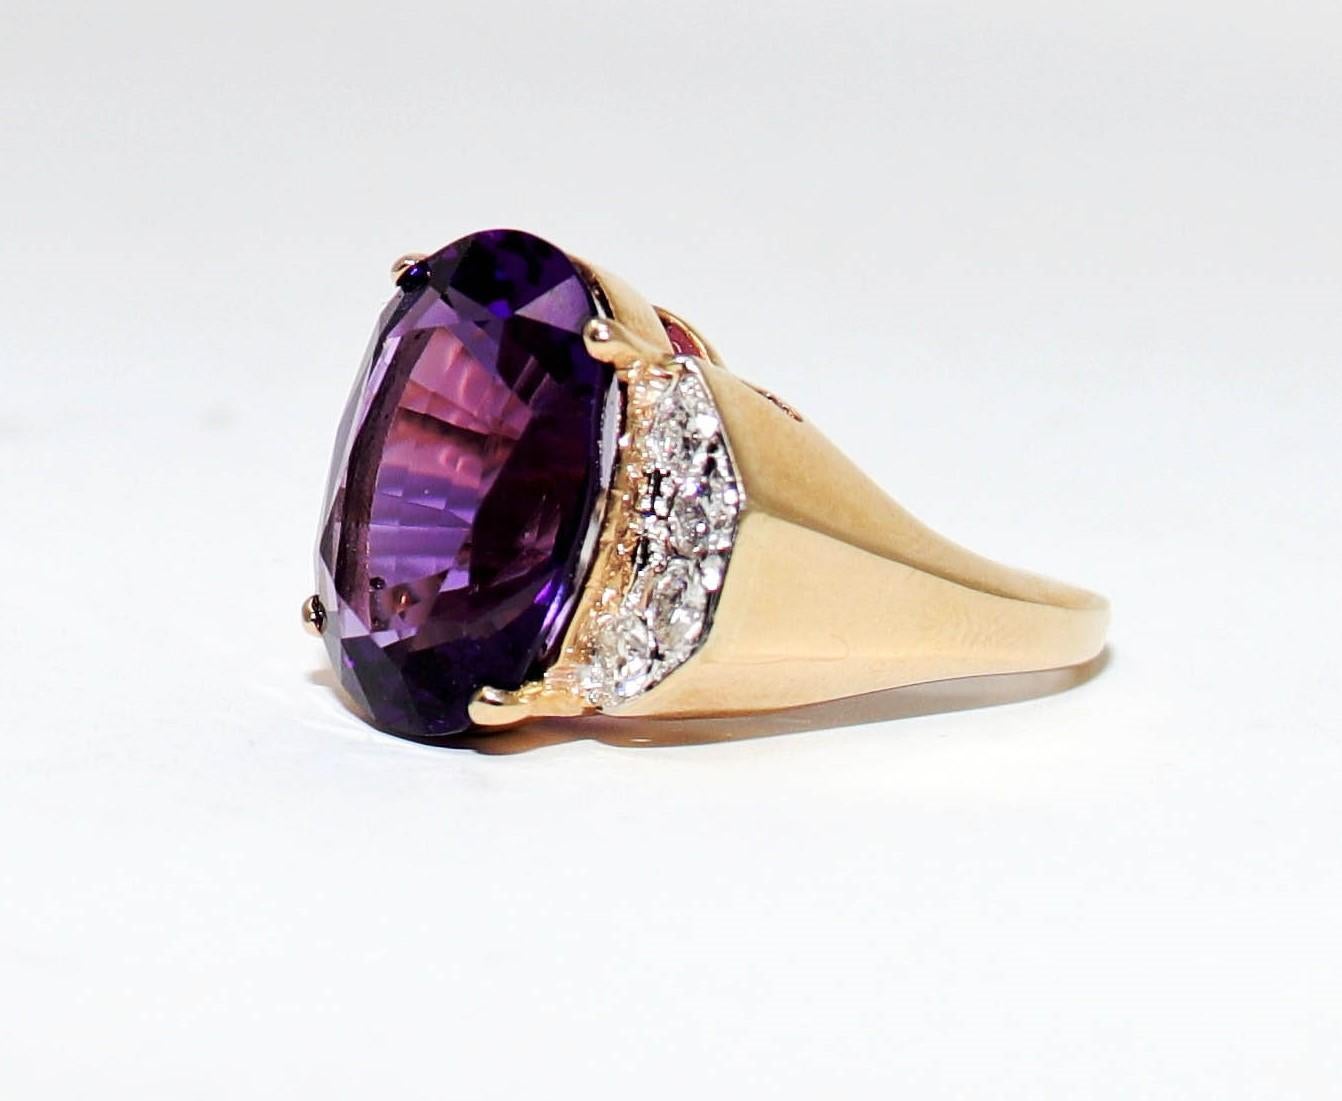 Oval Amethyst and Diamond Accent Cocktail Ring 14 Karat Gold 8.91 Carats Total In Good Condition For Sale In Scottsdale, AZ